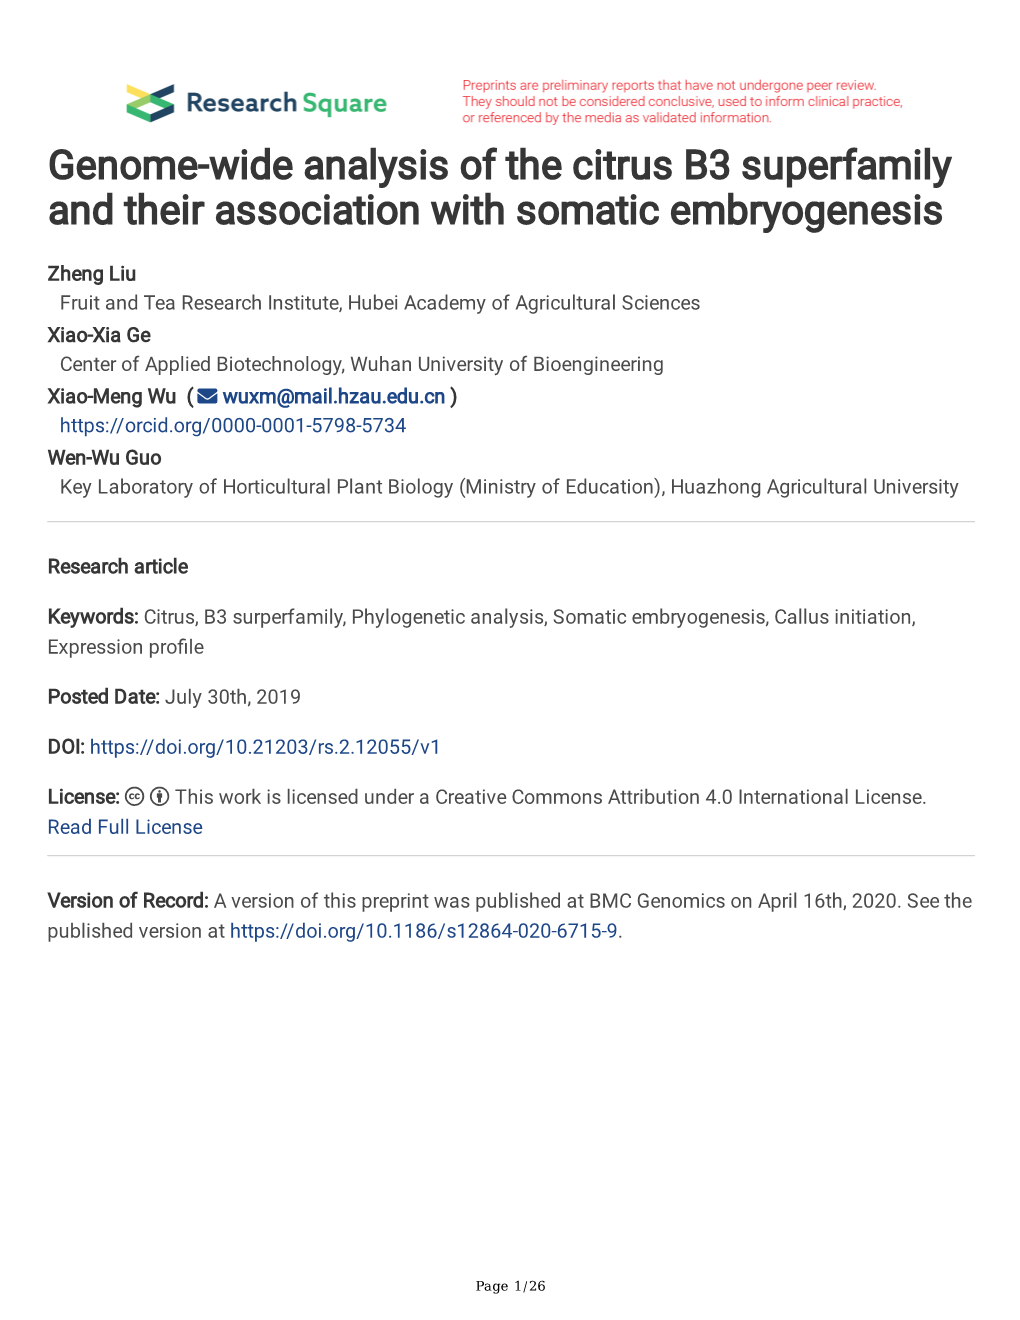 Genome-Wide Analysis of the Citrus B3 Superfamily and Their Association with Somatic Embryogenesis